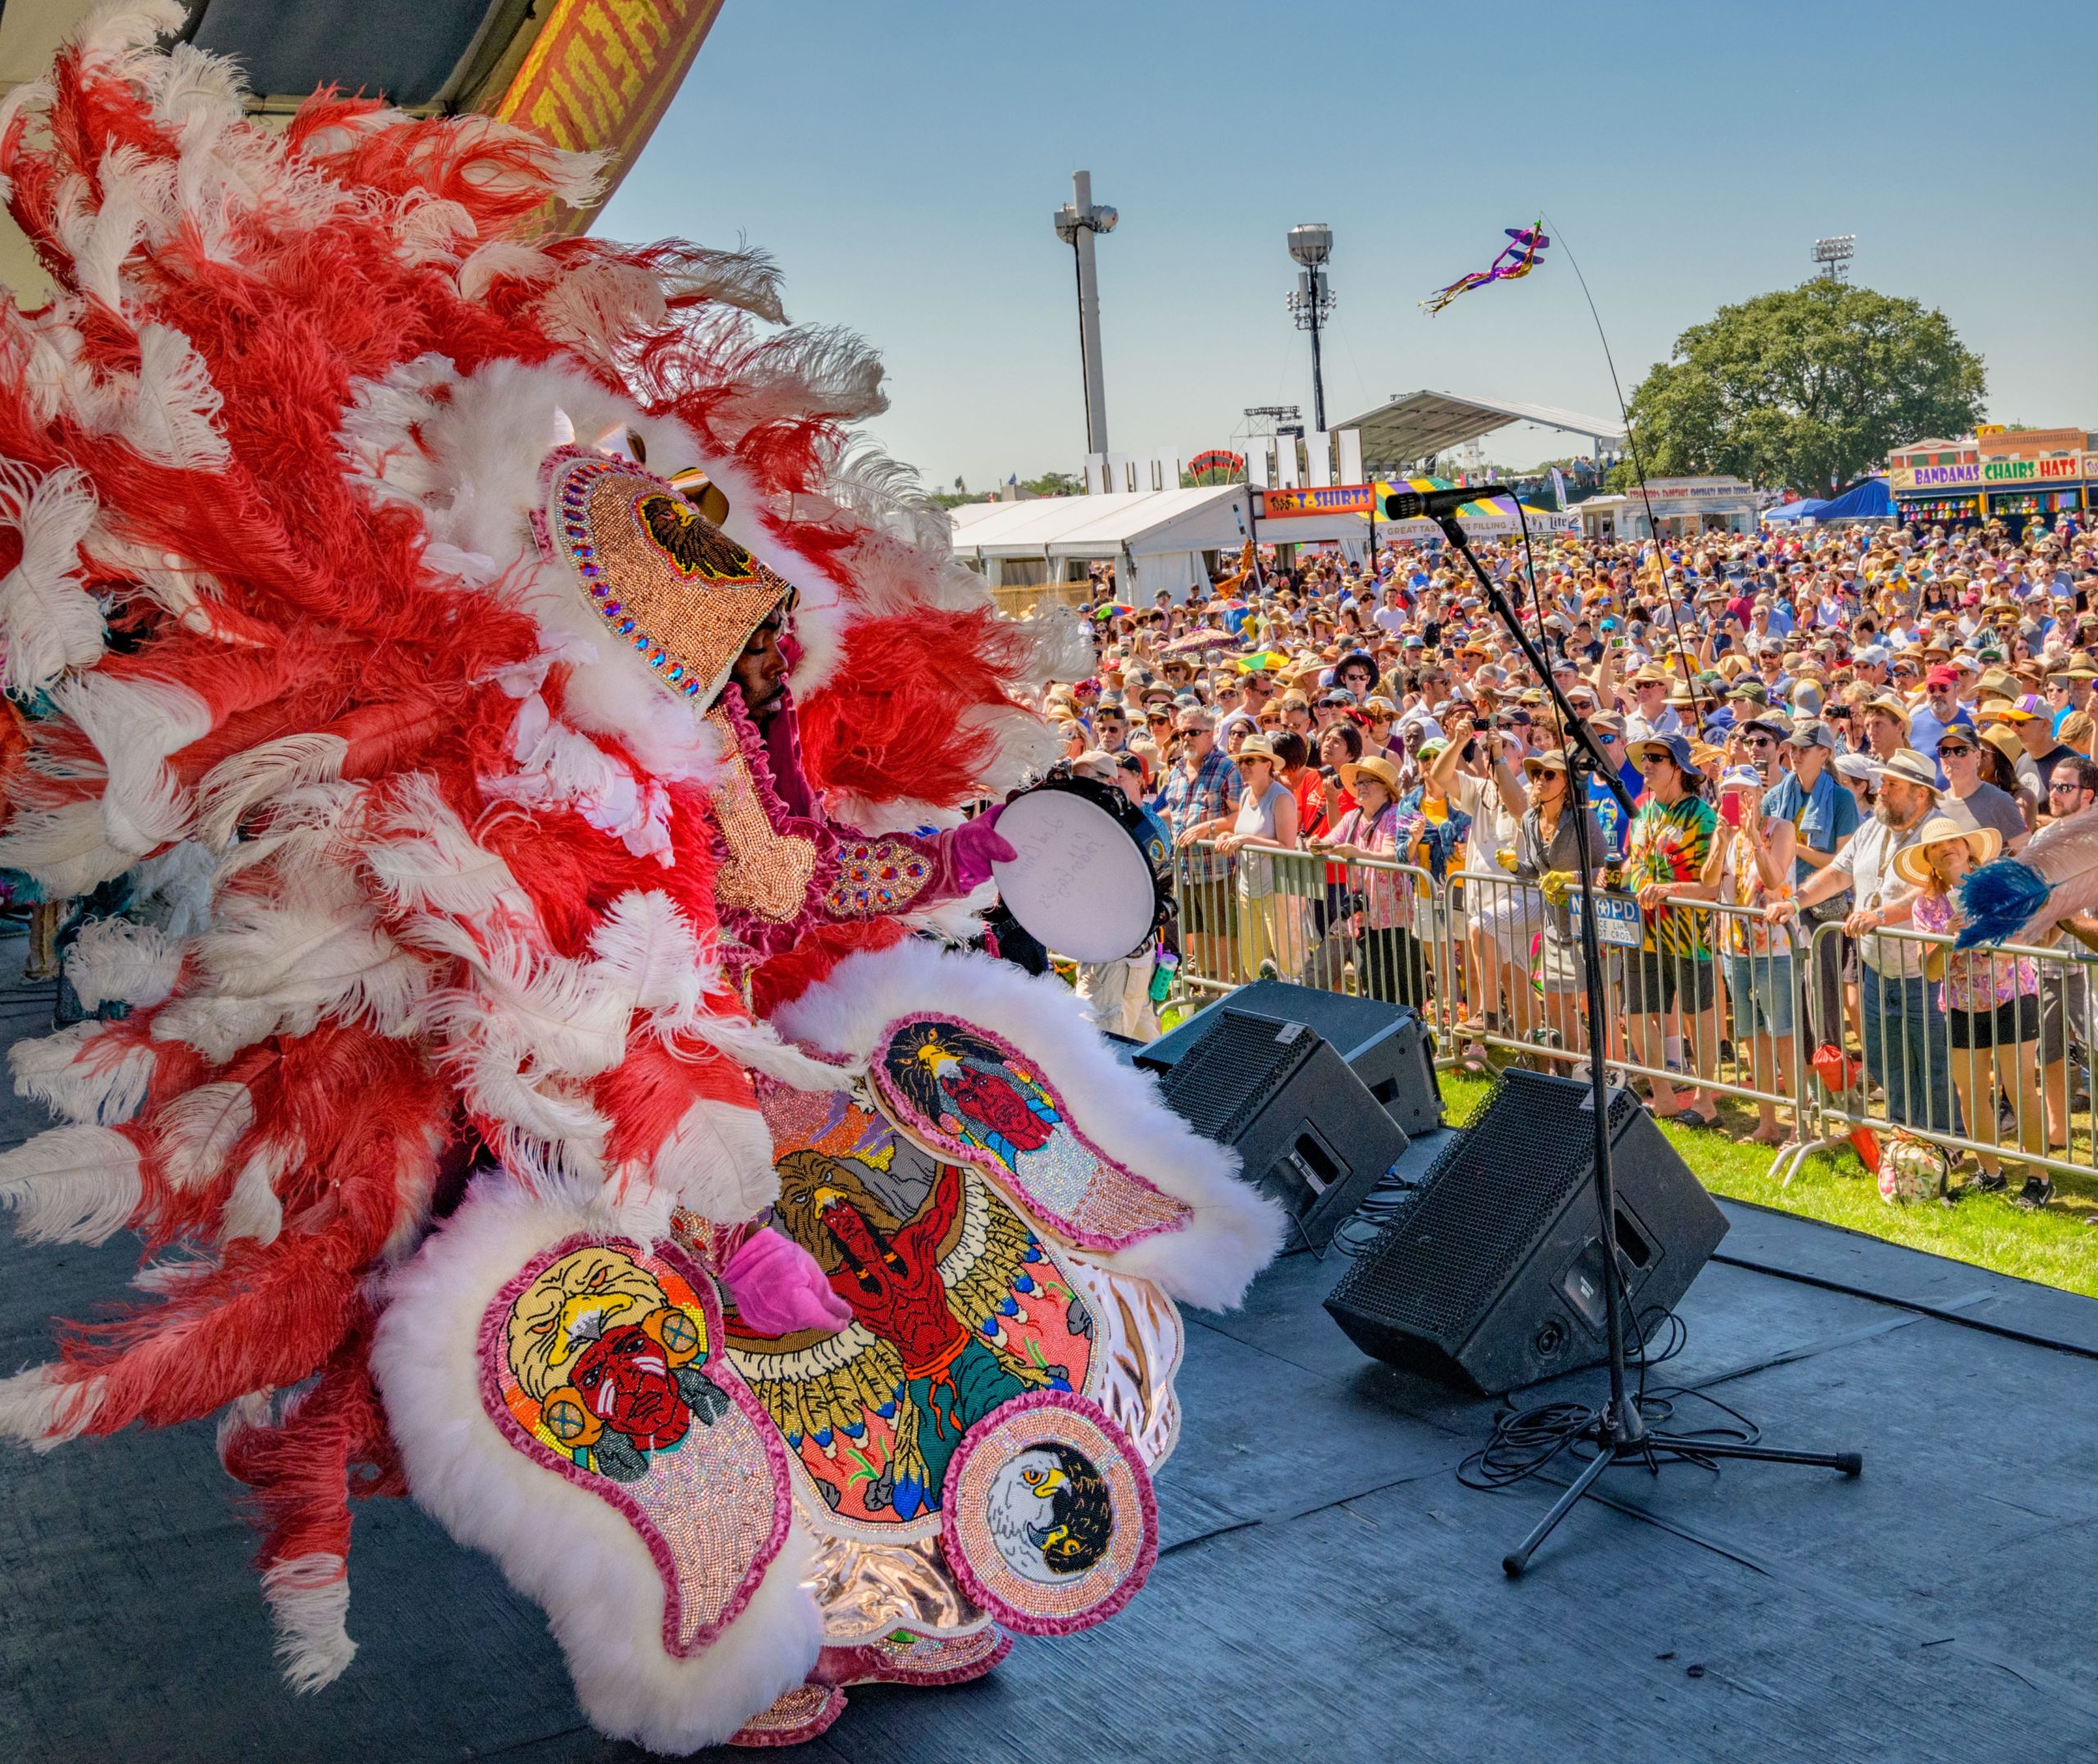 Big Chief Monk Boudreaux and the Golden Eagles Mardi Gras Indians including Second Chief Joseph Boudreaux, Jr., perform during the 50th New Orleans Jazz and Heritage Festival at the Fair Grounds in New Orleans, La. Sunday, April 28, 2019. Boudreaux performed during the first Jazz and Heritage Festival in 1970. Photo by Matthew Hinton